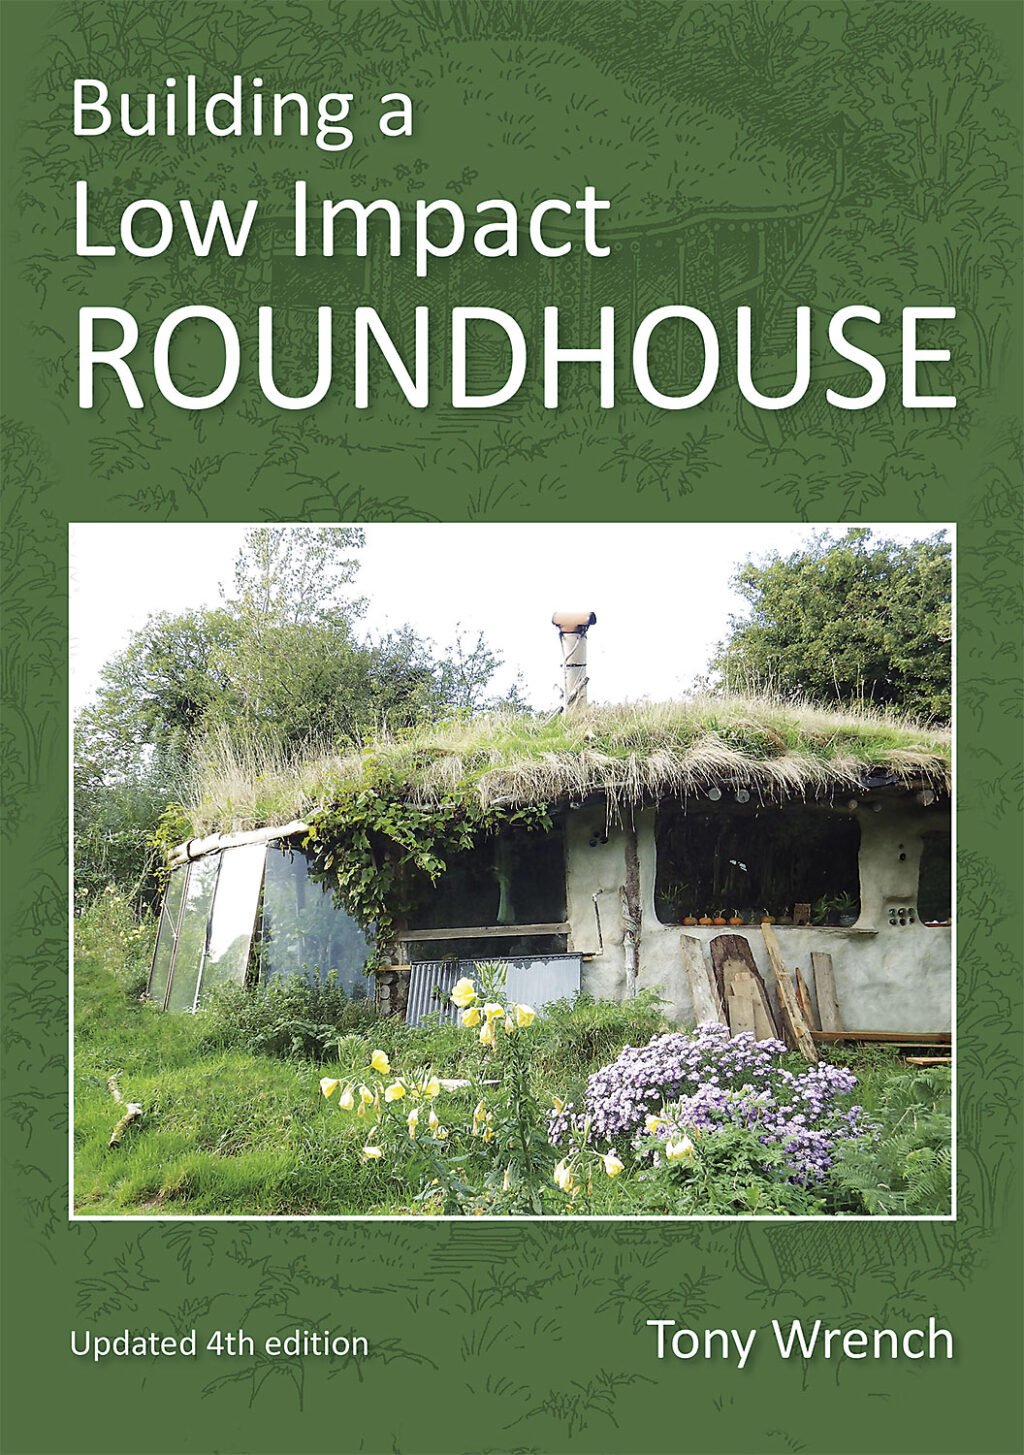 The Building a Low Impact Roundhouse